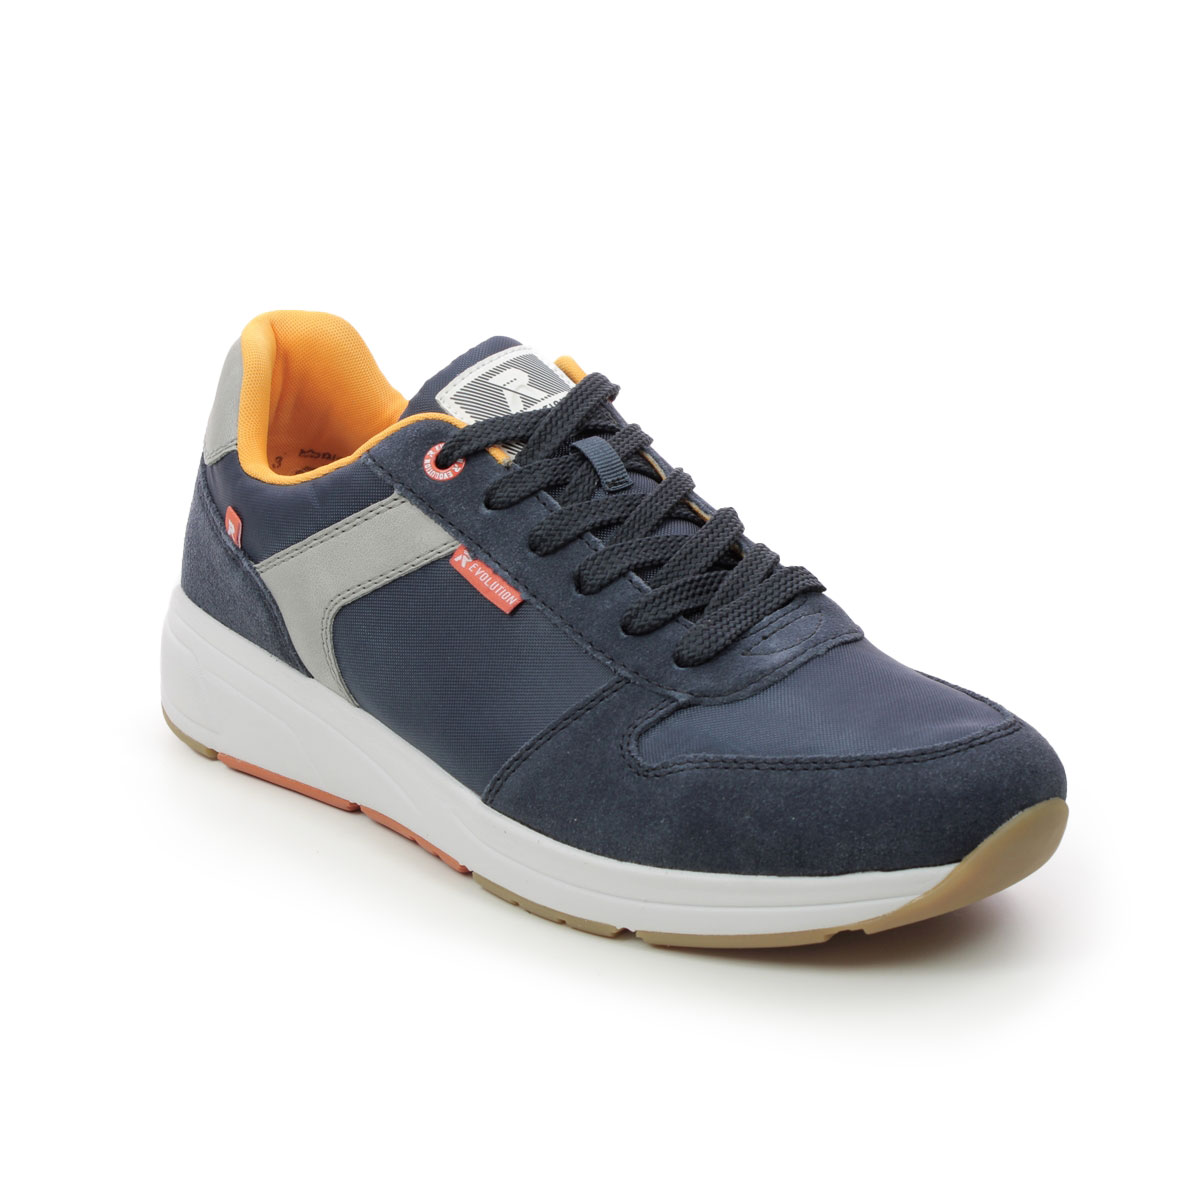 Rieker Archy Evo Navy Mens Trainers 07002-14 In Size 45 In Plain Navy